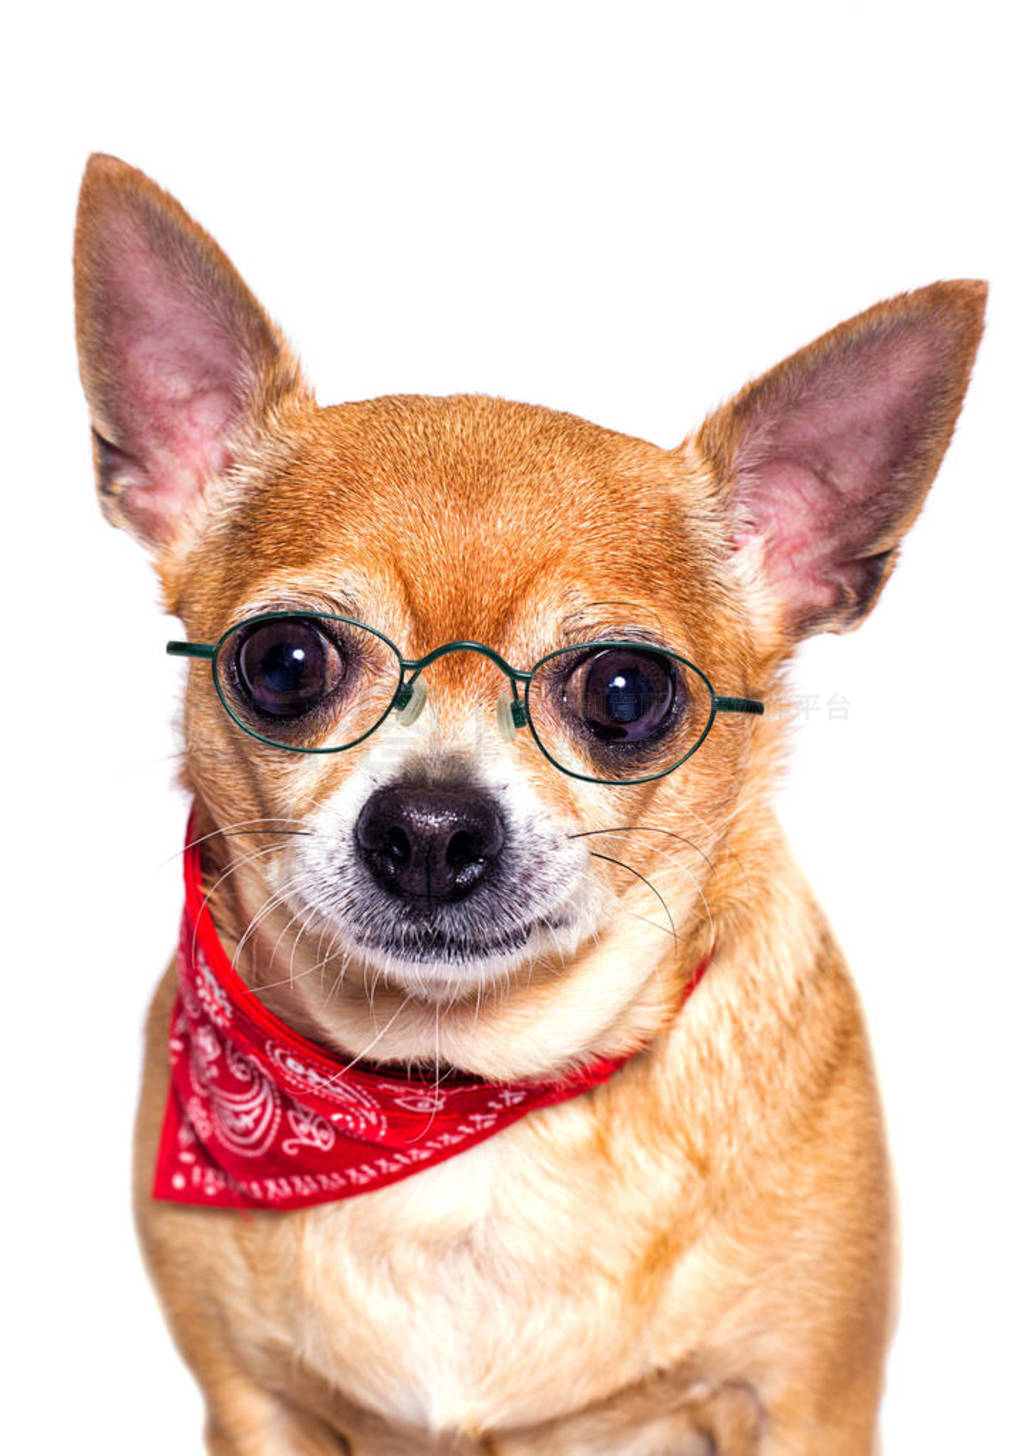 smart dog Chihuahua breed in glasses looks on an isolated white